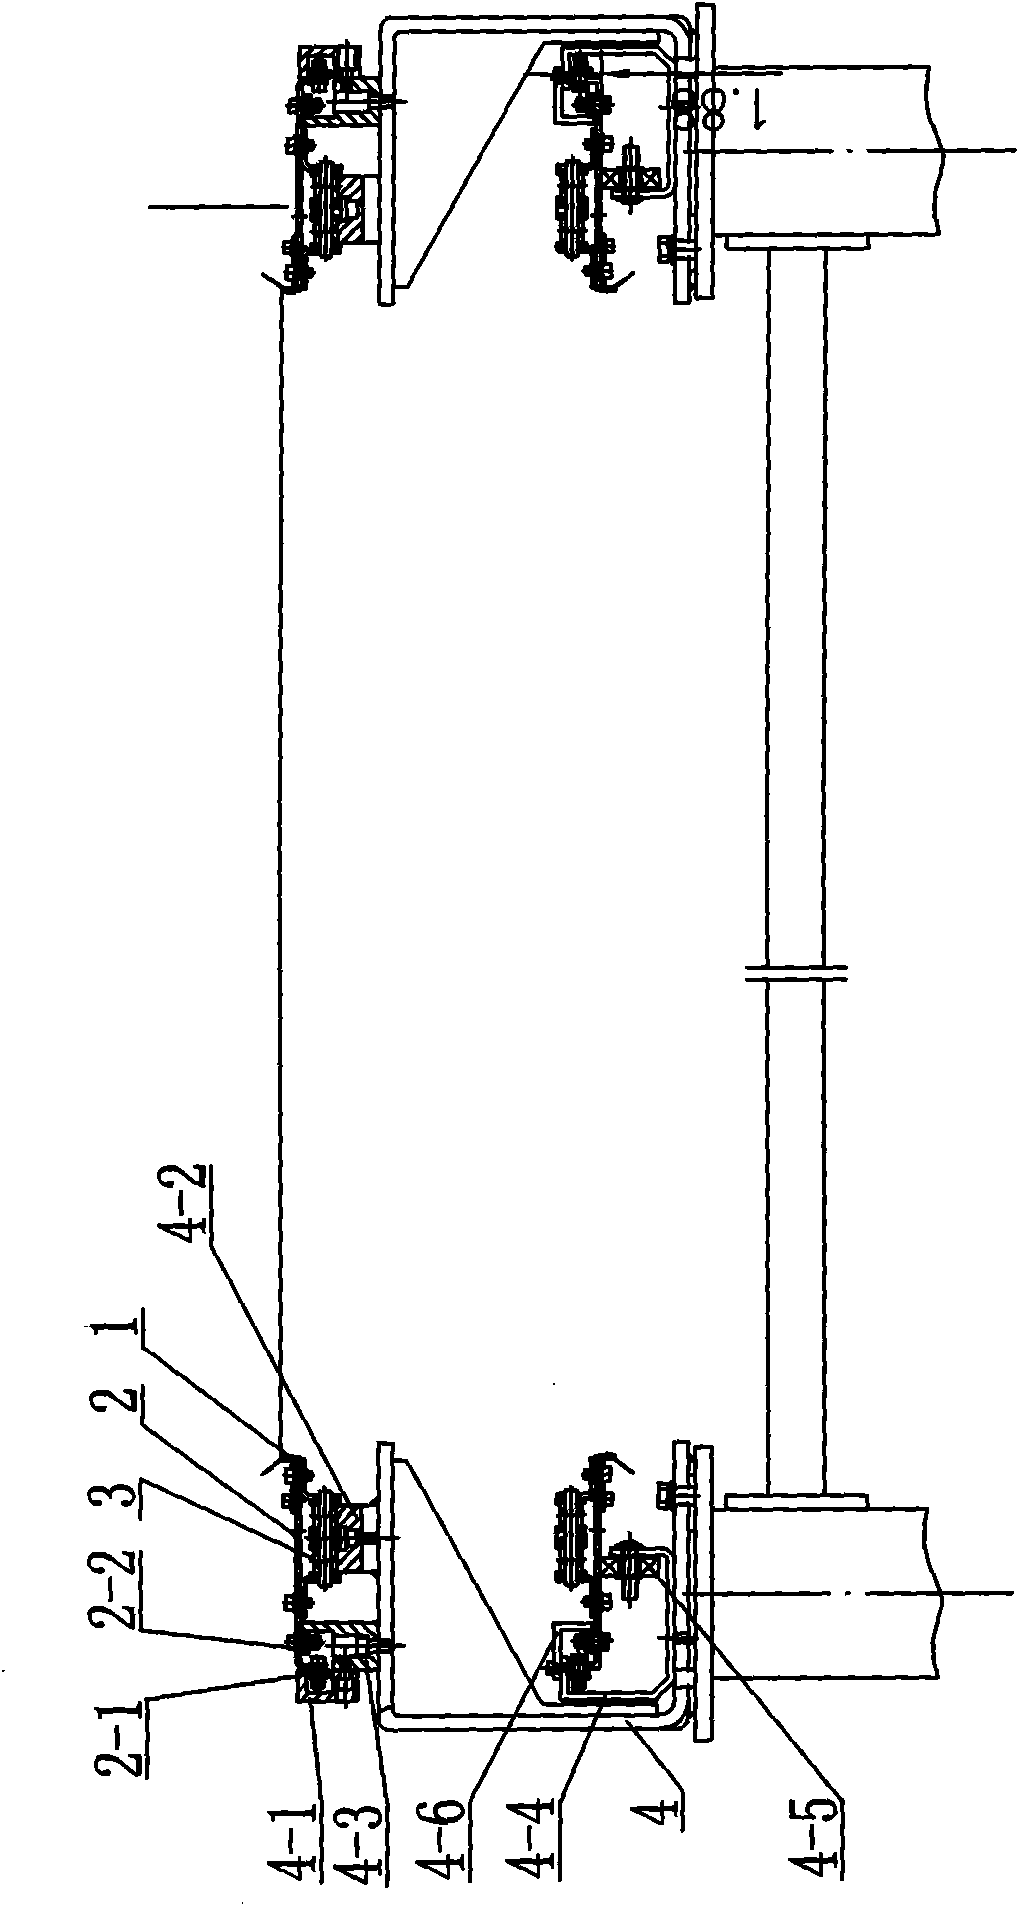 Multi-axial chain device for warp knitting machine